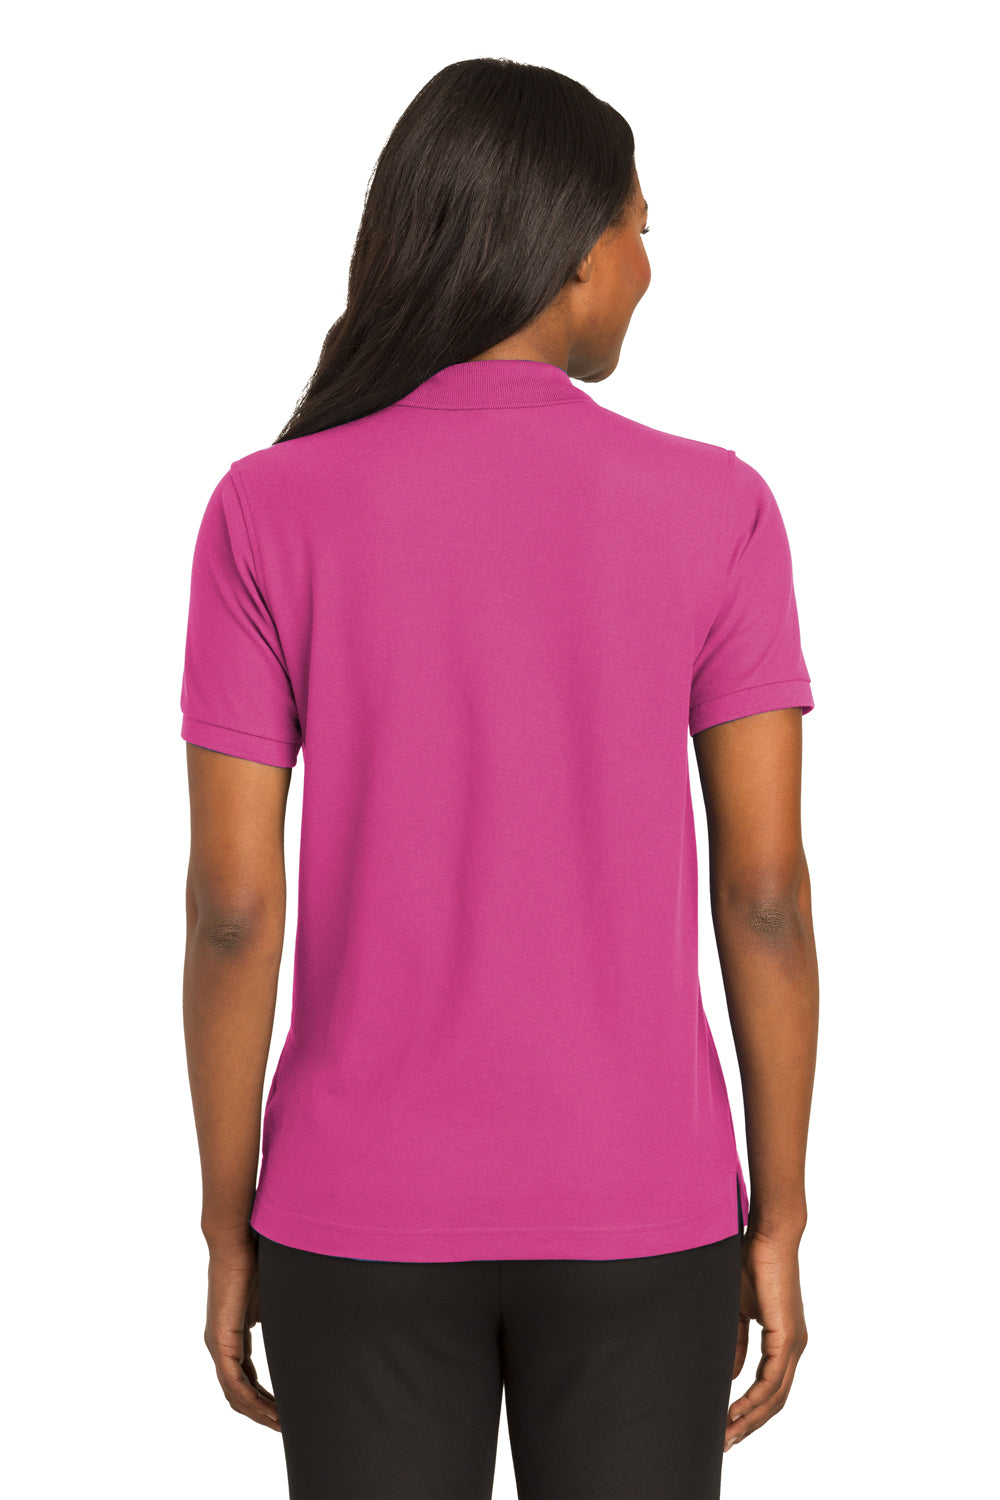 Port Authority L500 Womens Silk Touch Wrinkle Resistant Short Sleeve Polo Shirt Tropical Pink Back